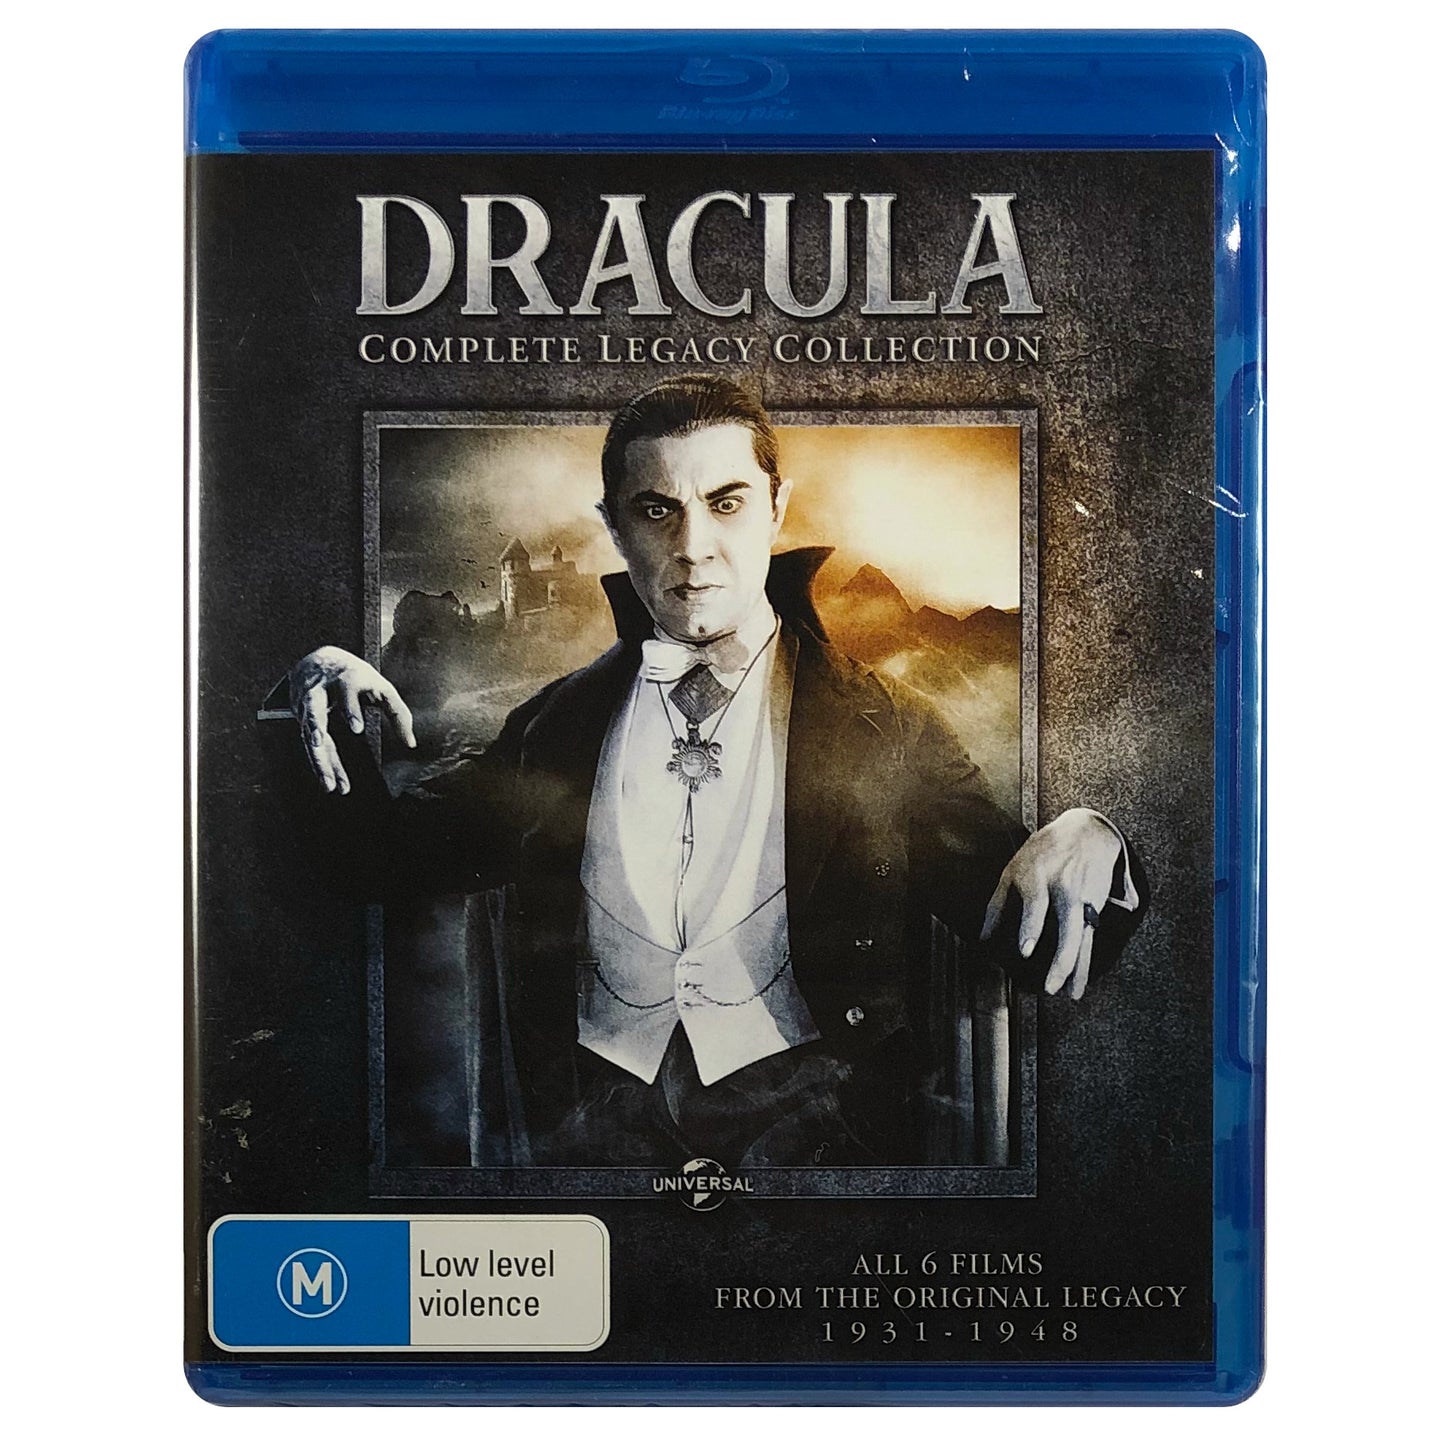 The Dracula Complete Legacy Collection Blu-Ray Box Set